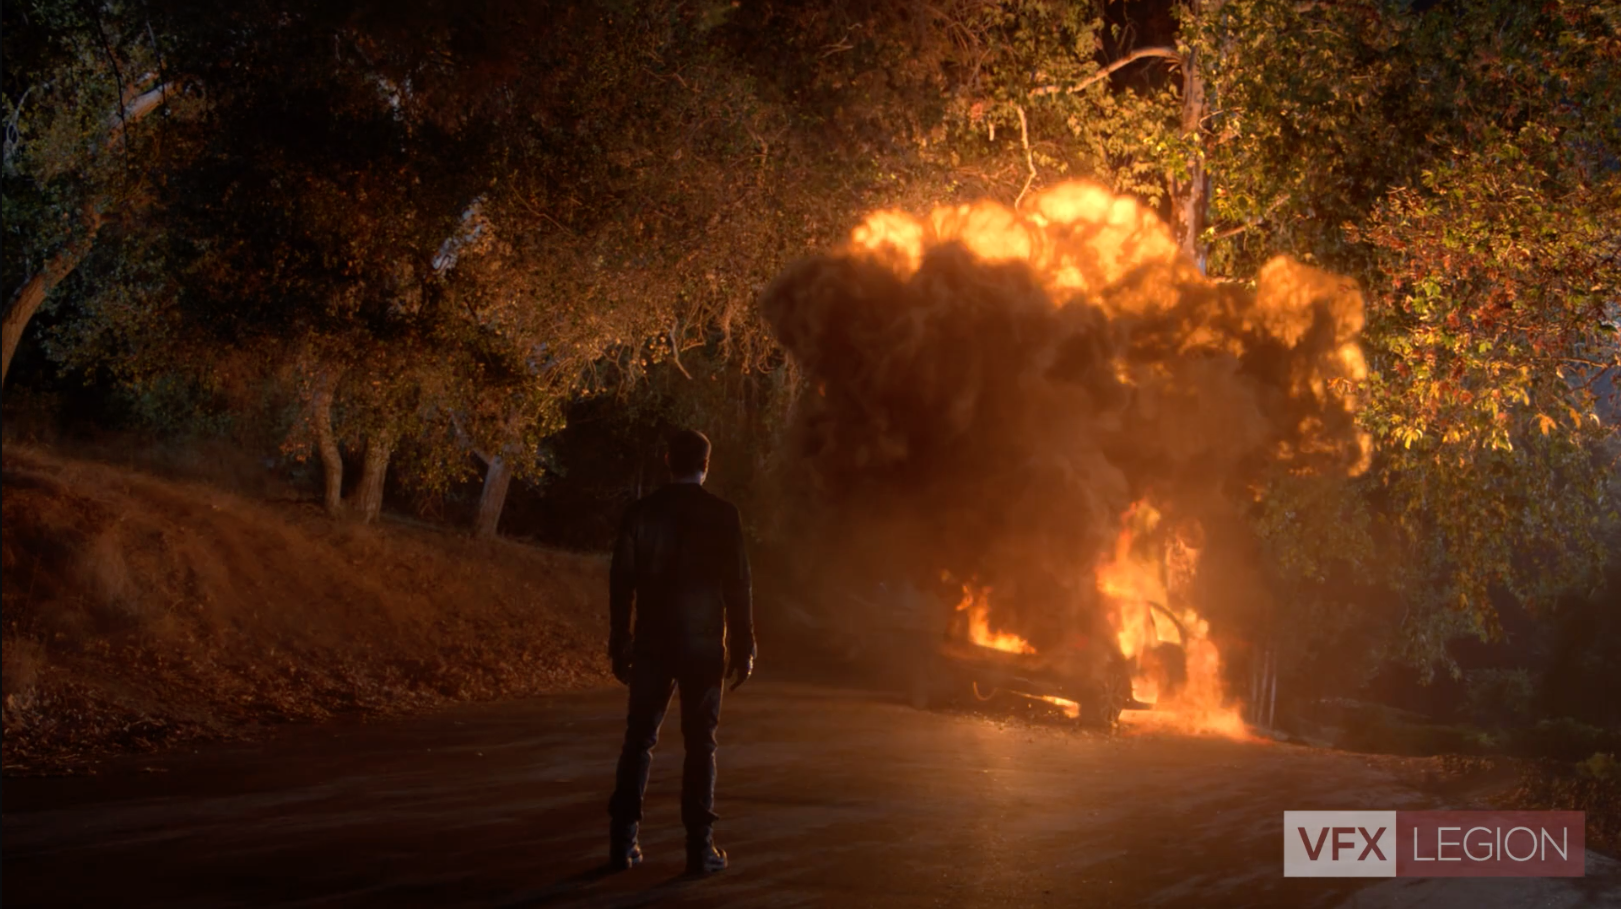 A man standing in a road, looking at a wrecked car on fire.